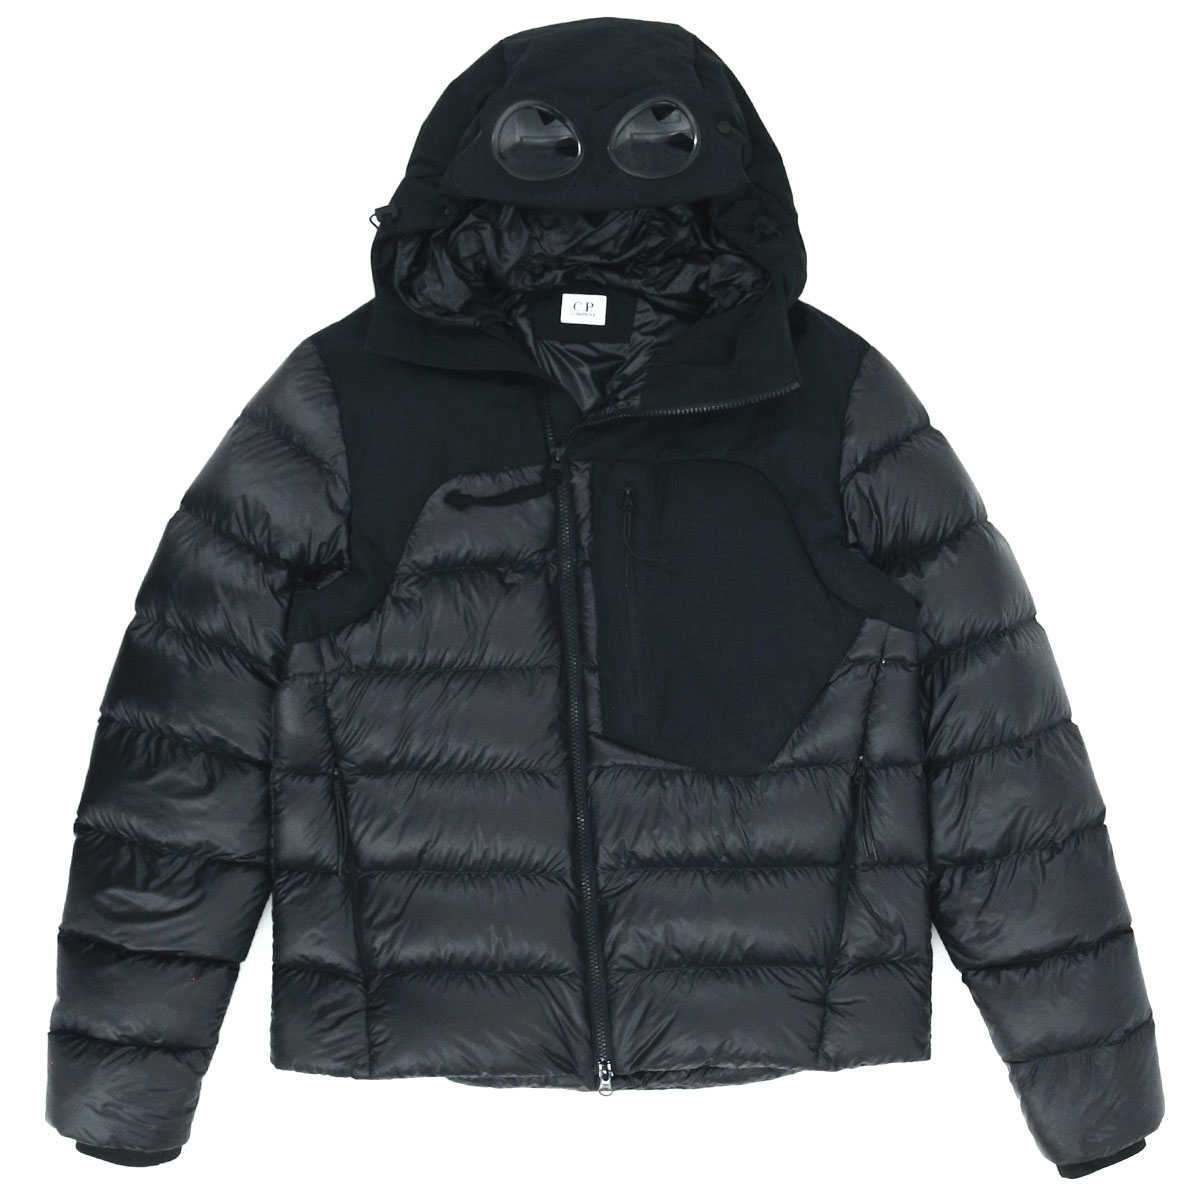 C.P. COMPANY シーピーカンパニー 17AW D.D. SHELL GOGGLE DOWN JACKET ...